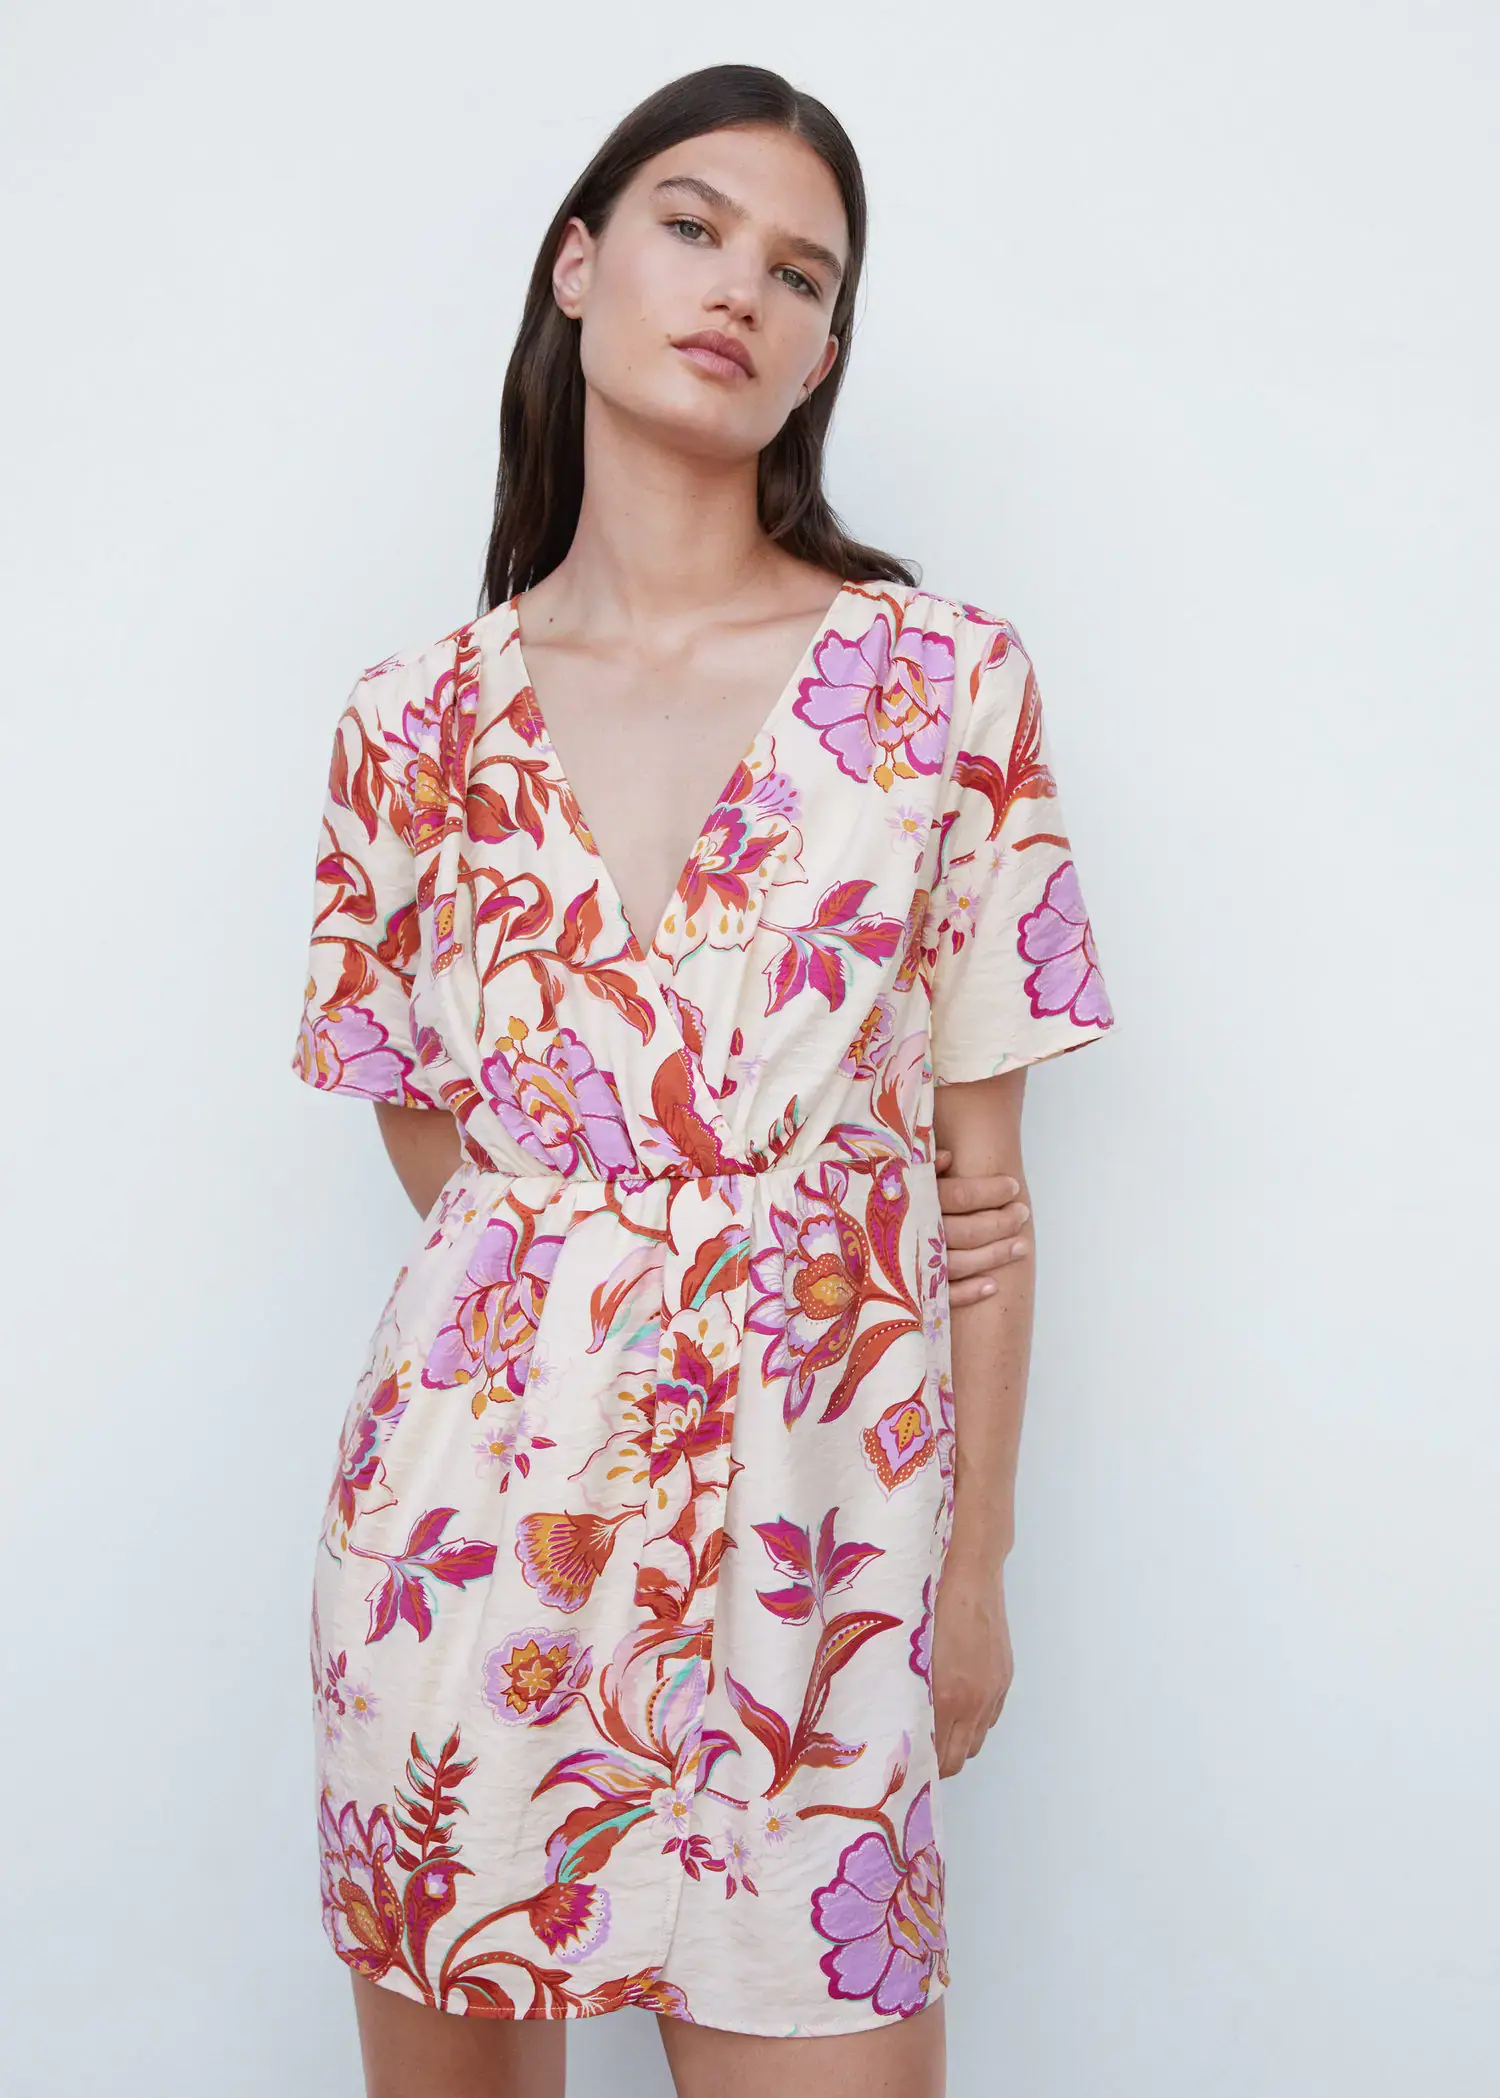 Mango Short printed wrap dress. a woman in a floral dress posing for a picture. 